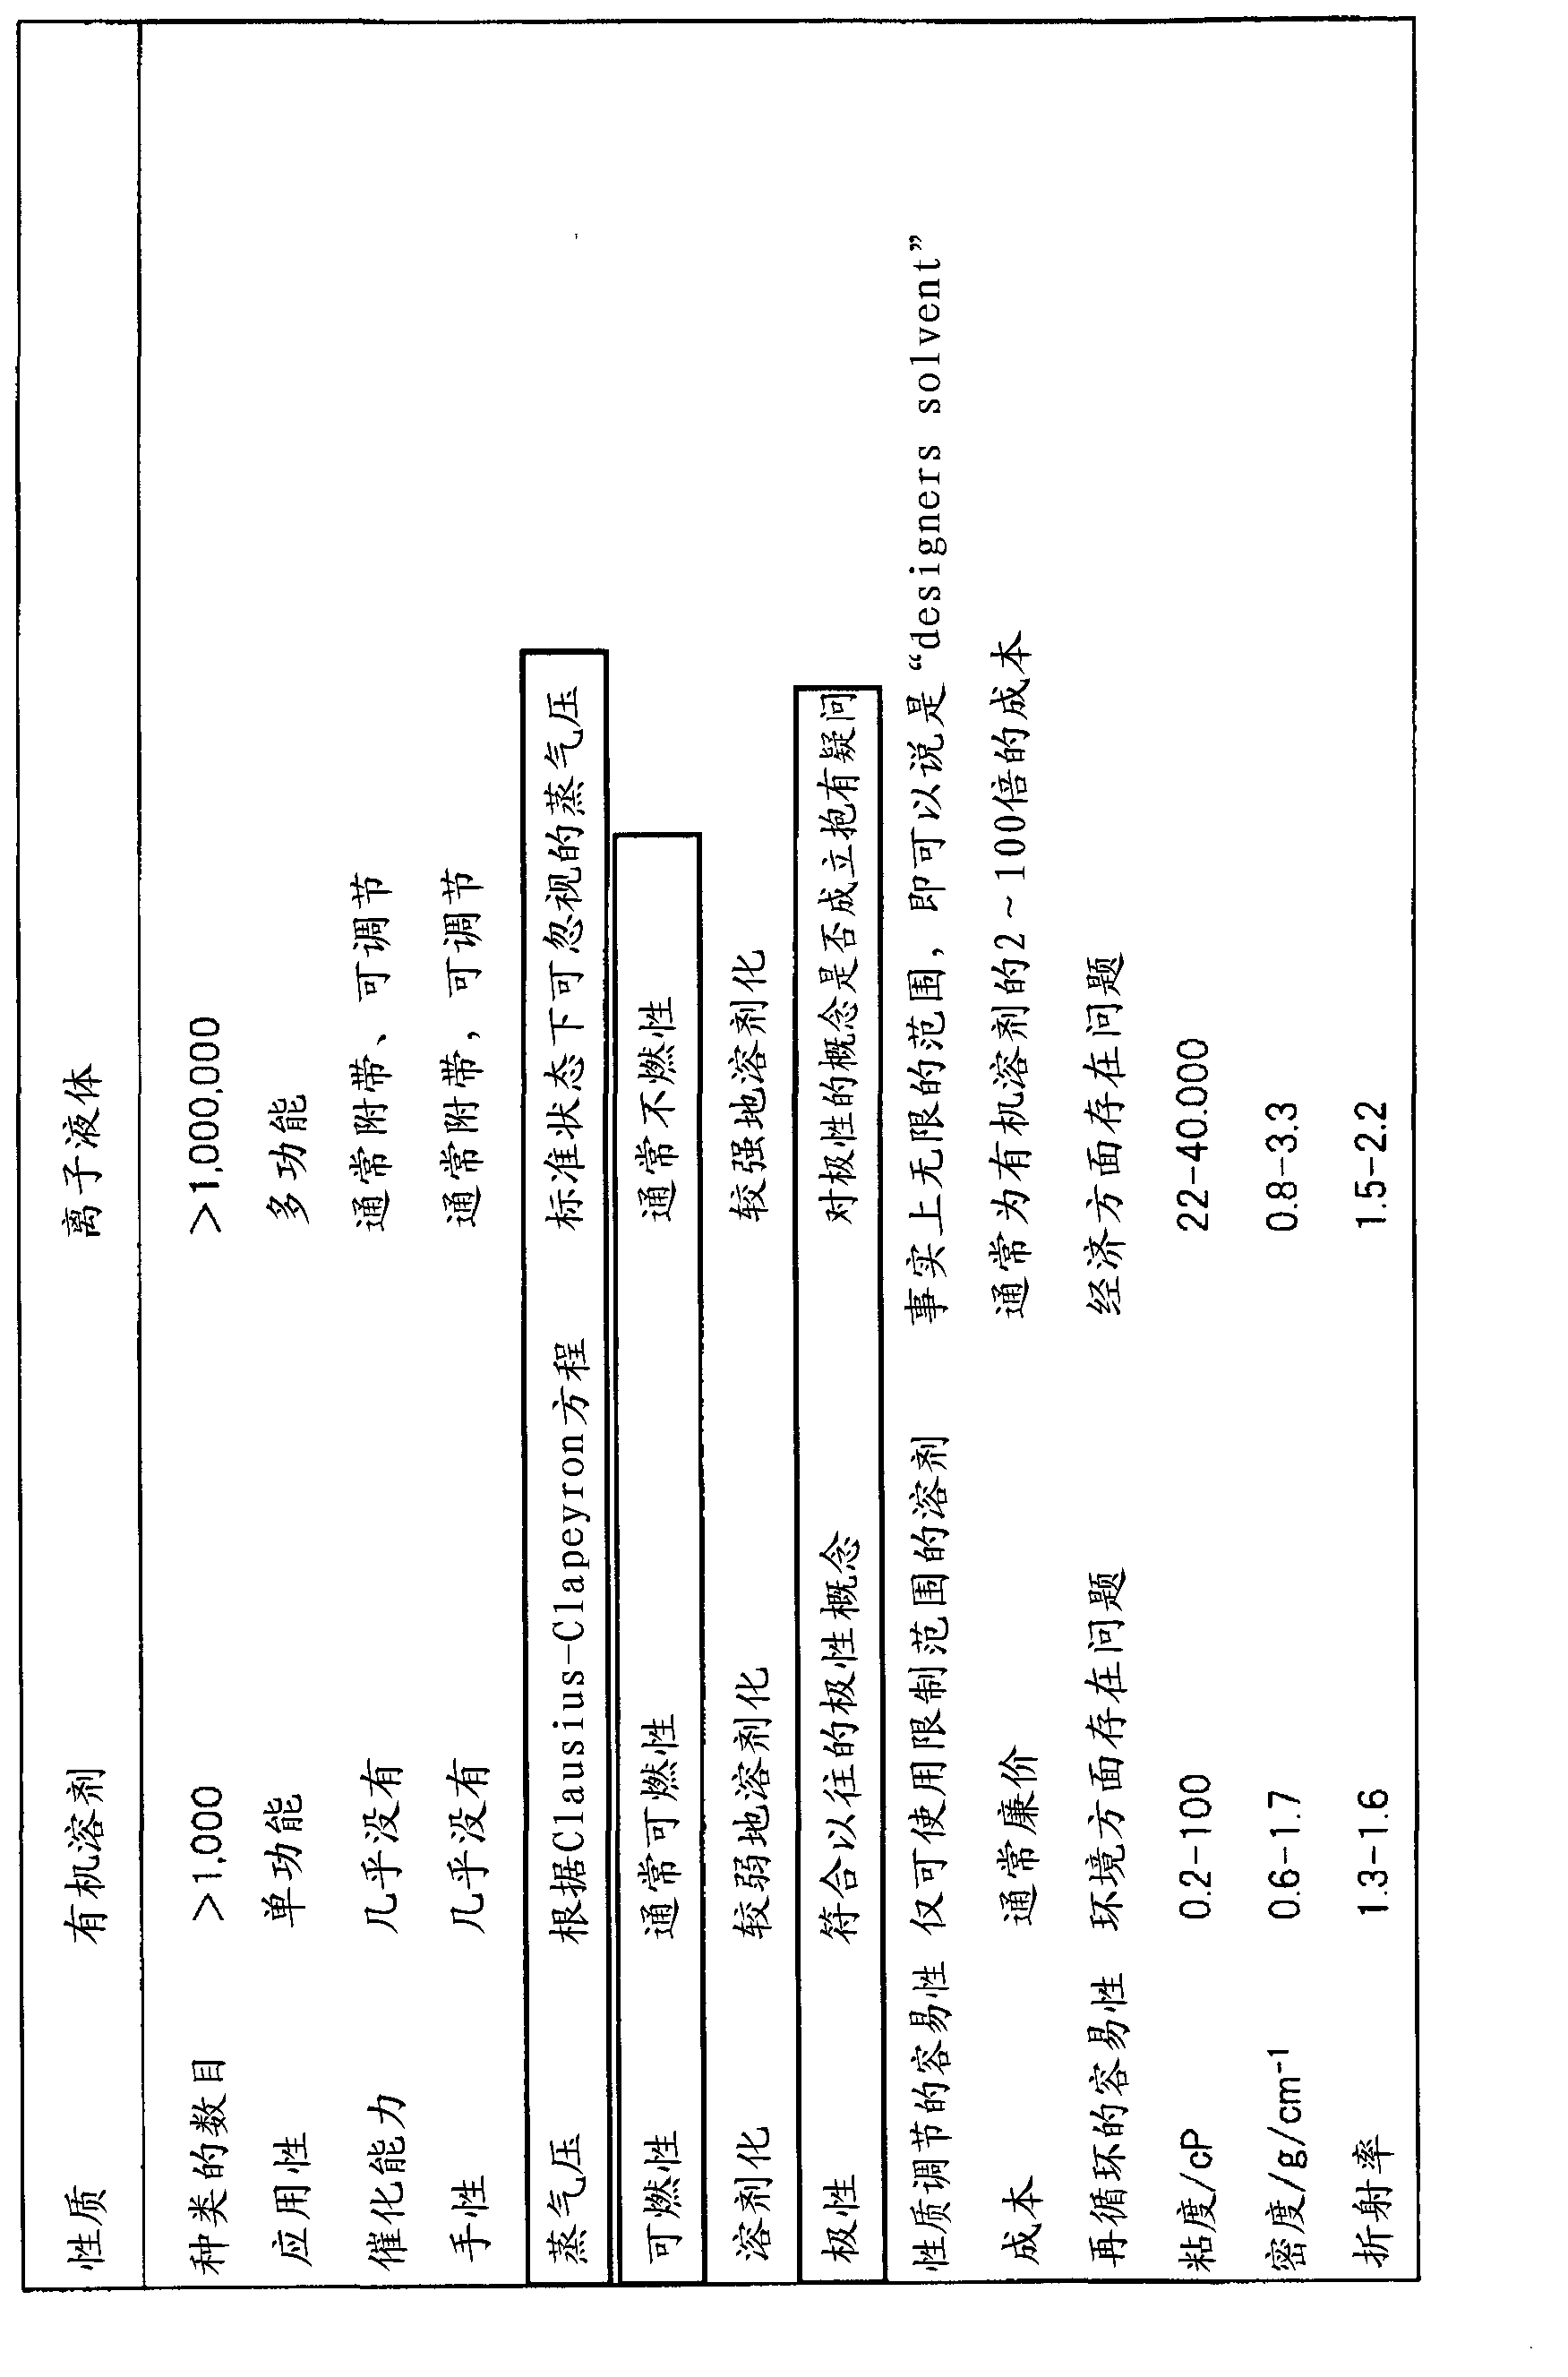 Light conversion element containing ion liquid, production method of same, and device containing photovoltaic conversion element